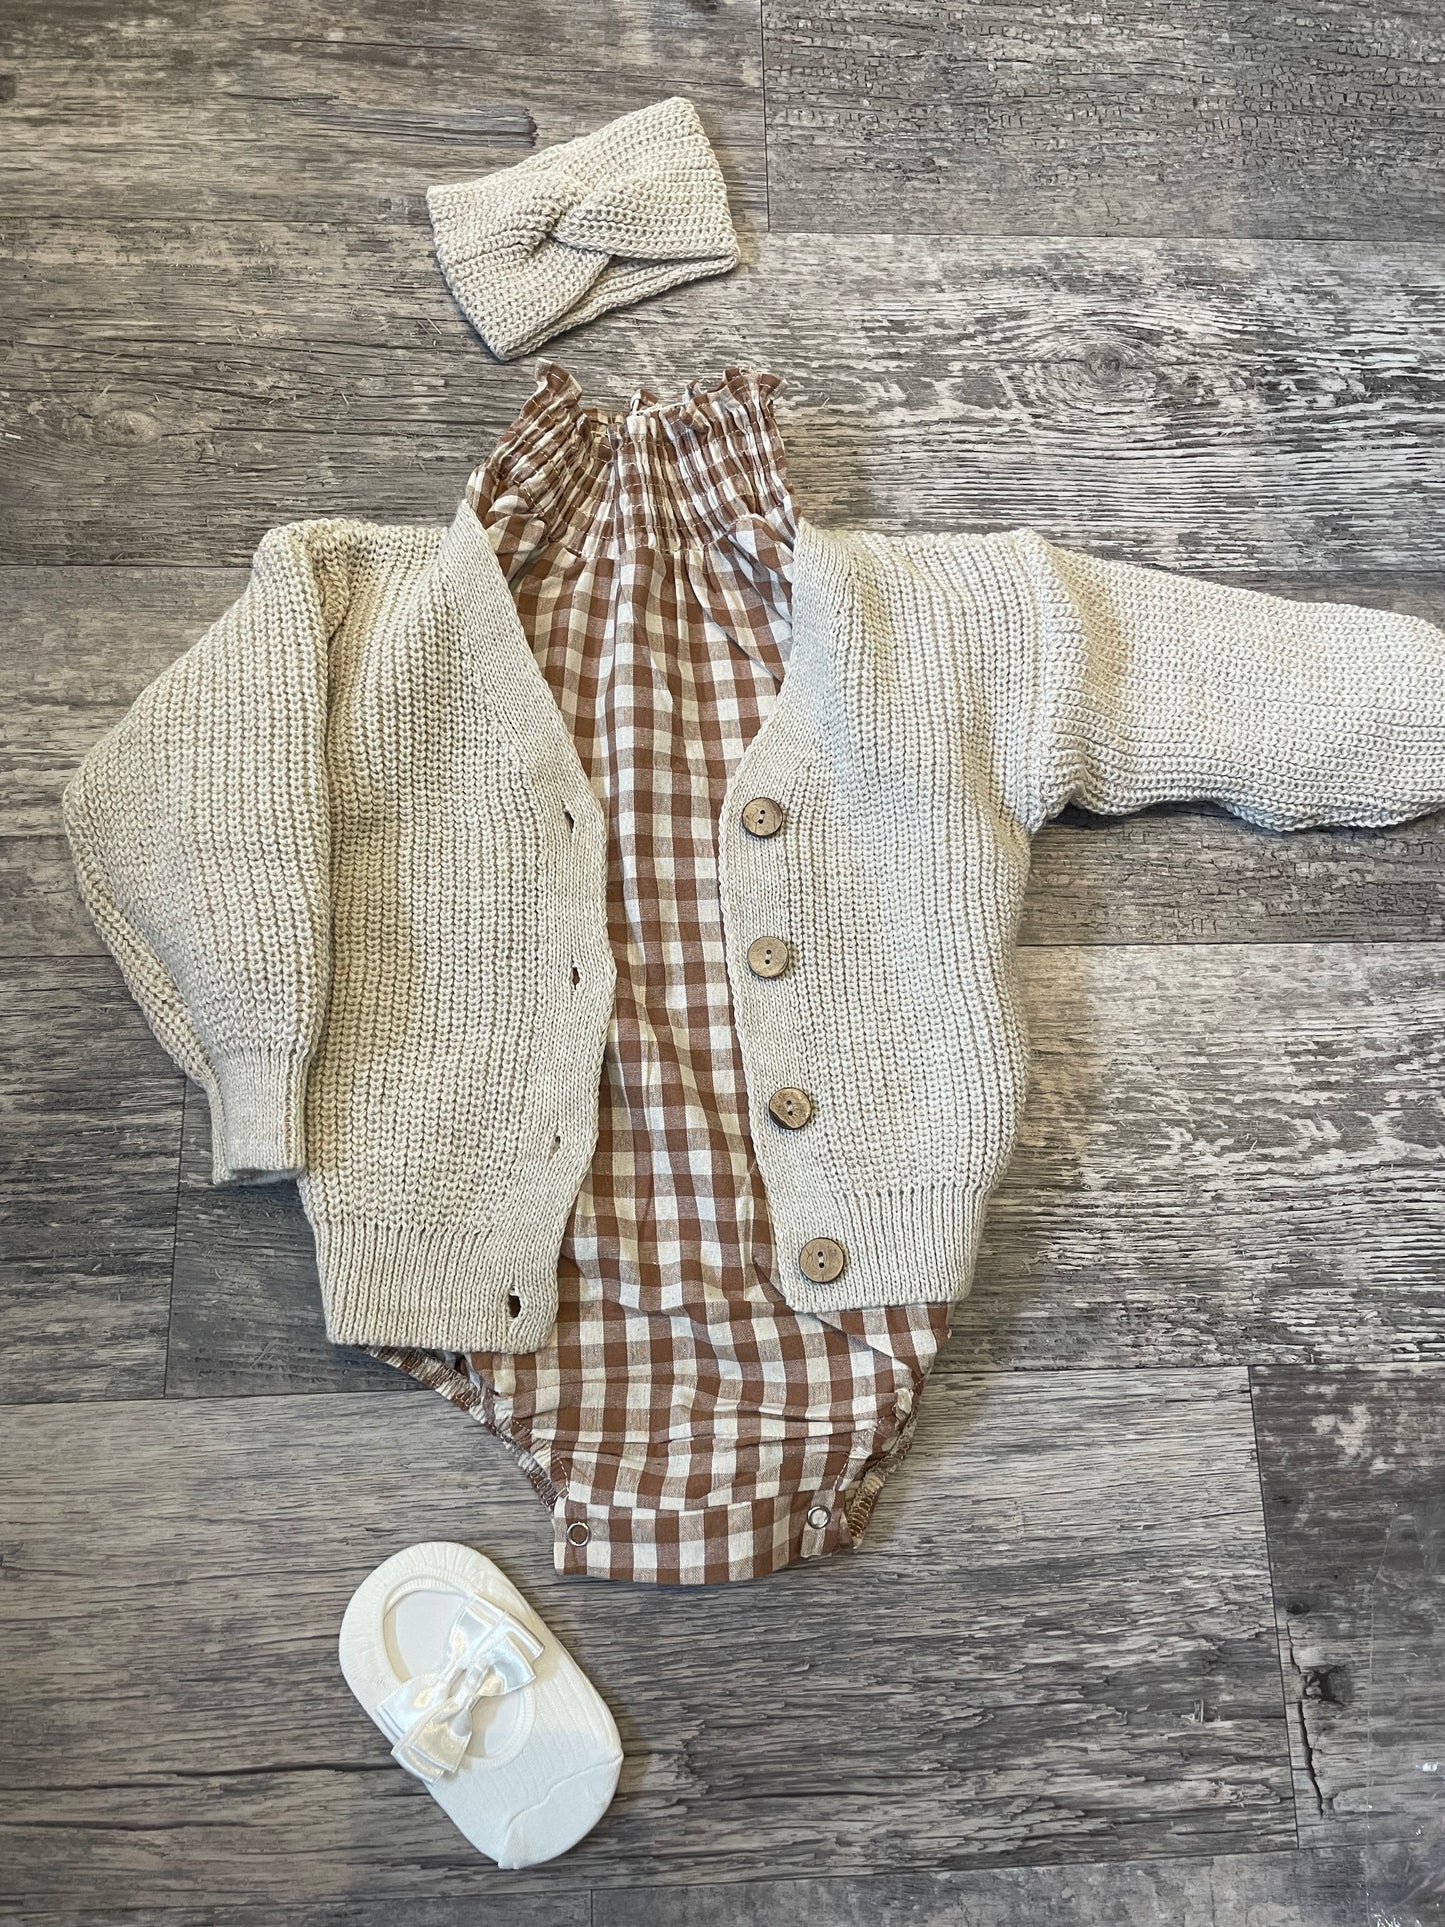 Grey/light Beige hand knitted cardigans